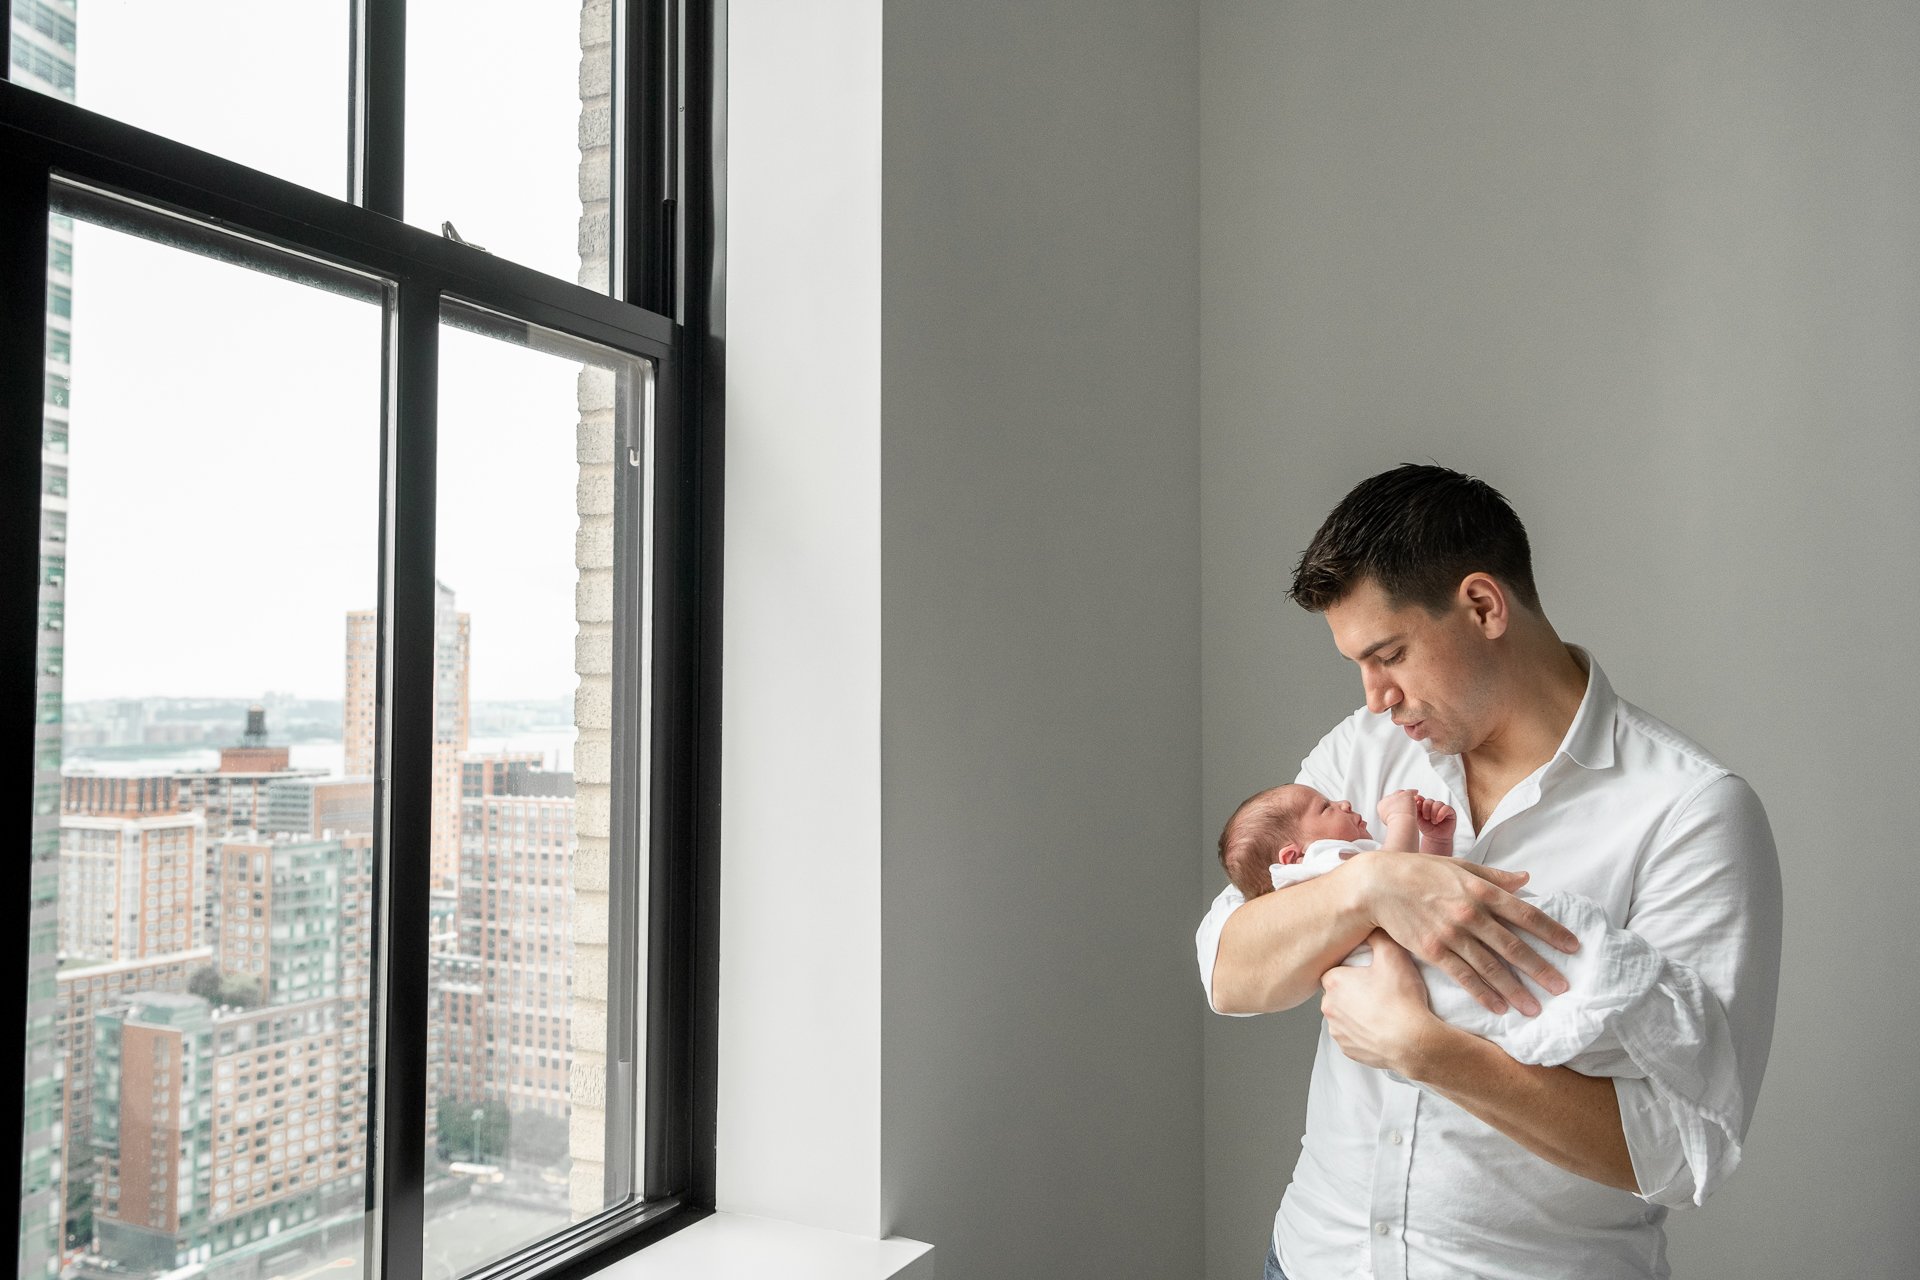  With the New York skyline out the window, a father rocks his baby by Nicole Hawkins Photography. modern newborn family portraits NYC #nicolehawkinsphotography #NYCbabyphotography #newbornportraits #NewYorkStudioPhotography #newbornsession 